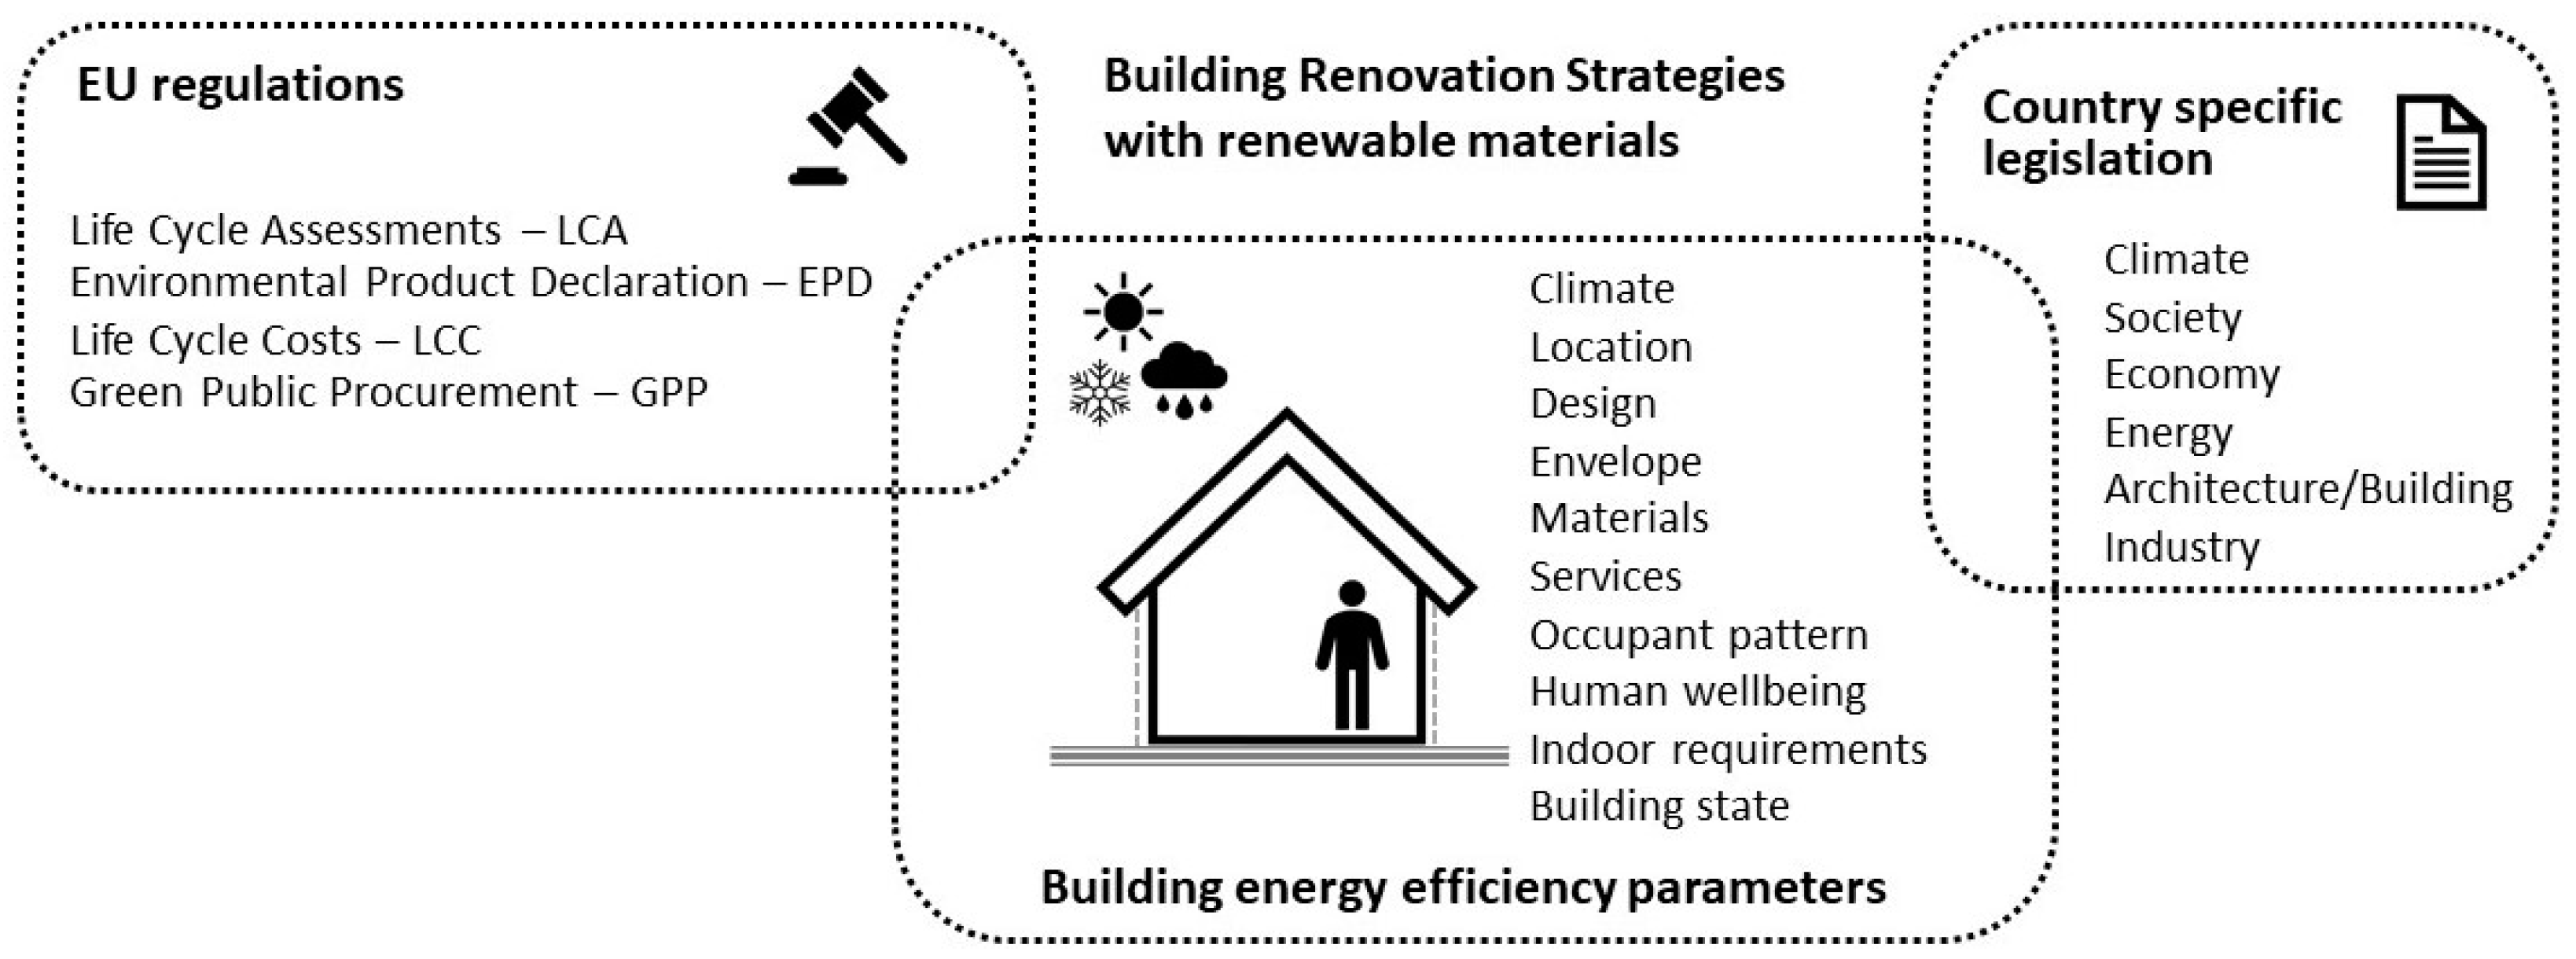 Sustainability | Free Full-Text of Frameworks the in Energy Renewable Bosnia-Herzegovina Analysis and Current Opportunities Slovenia Using | Retrofitting Materials—Comparative